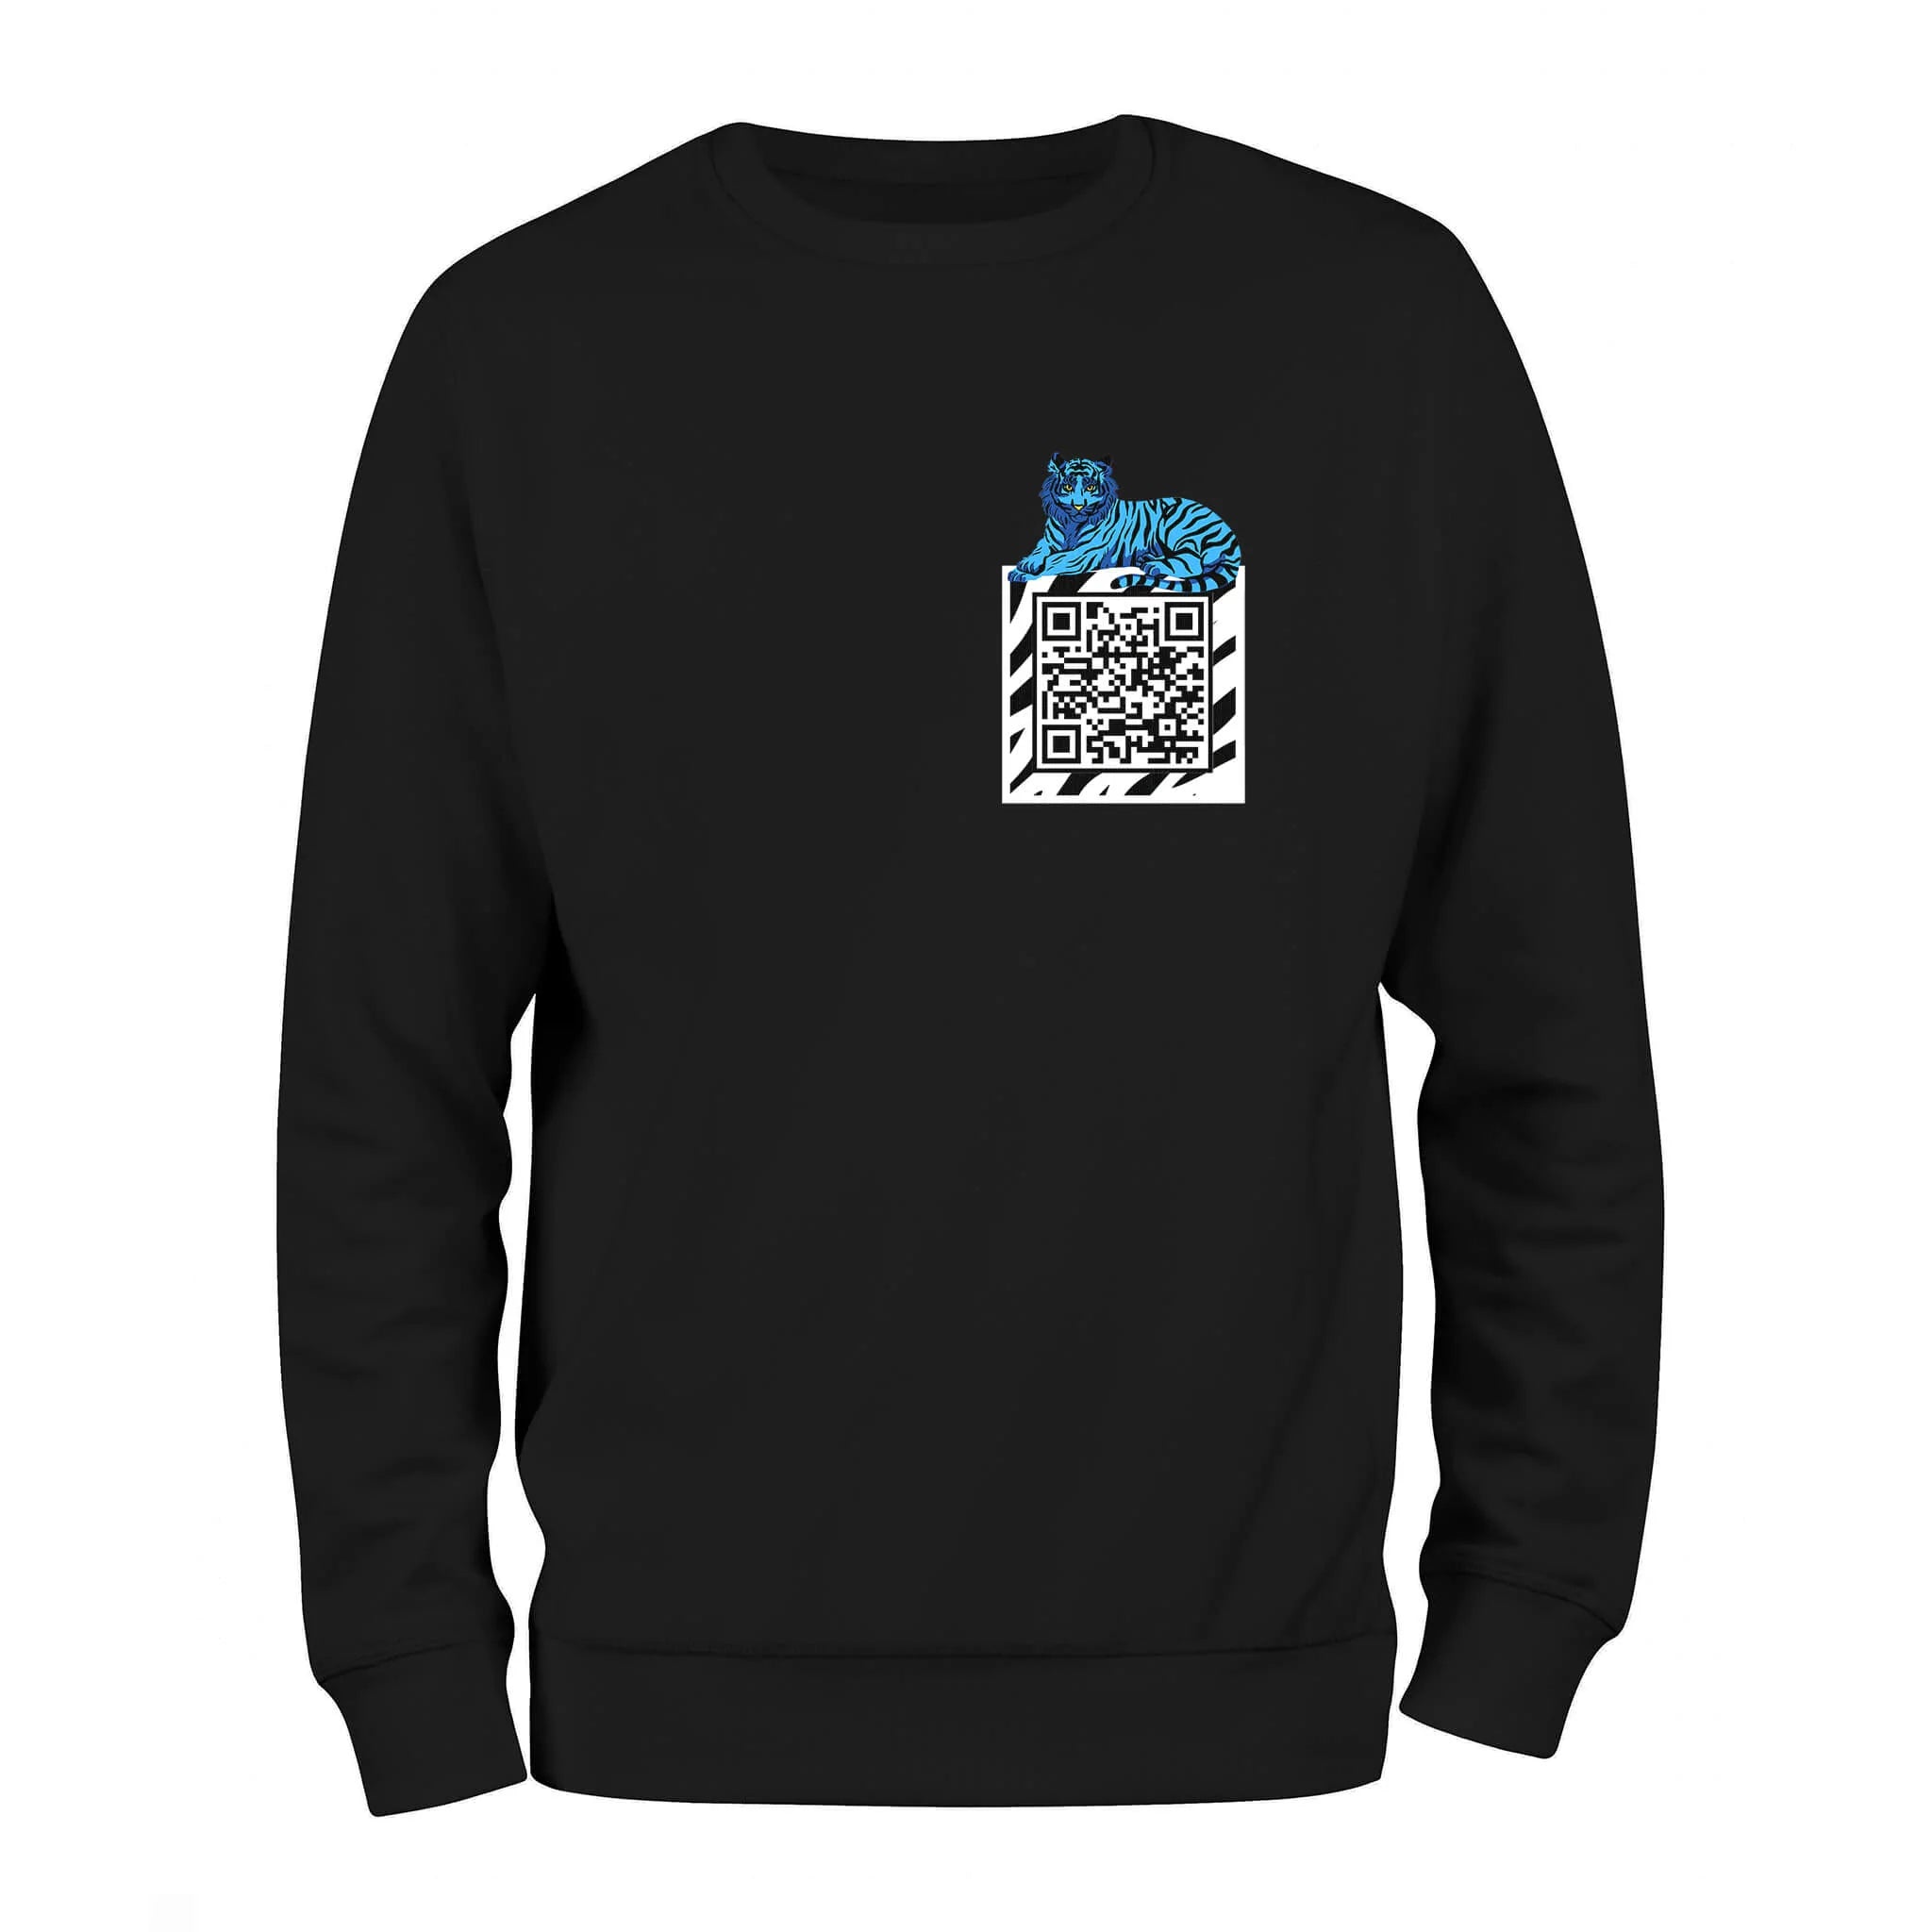 Black QR Sweatshirt from RESHRD Savannah collection with Front Black & White design